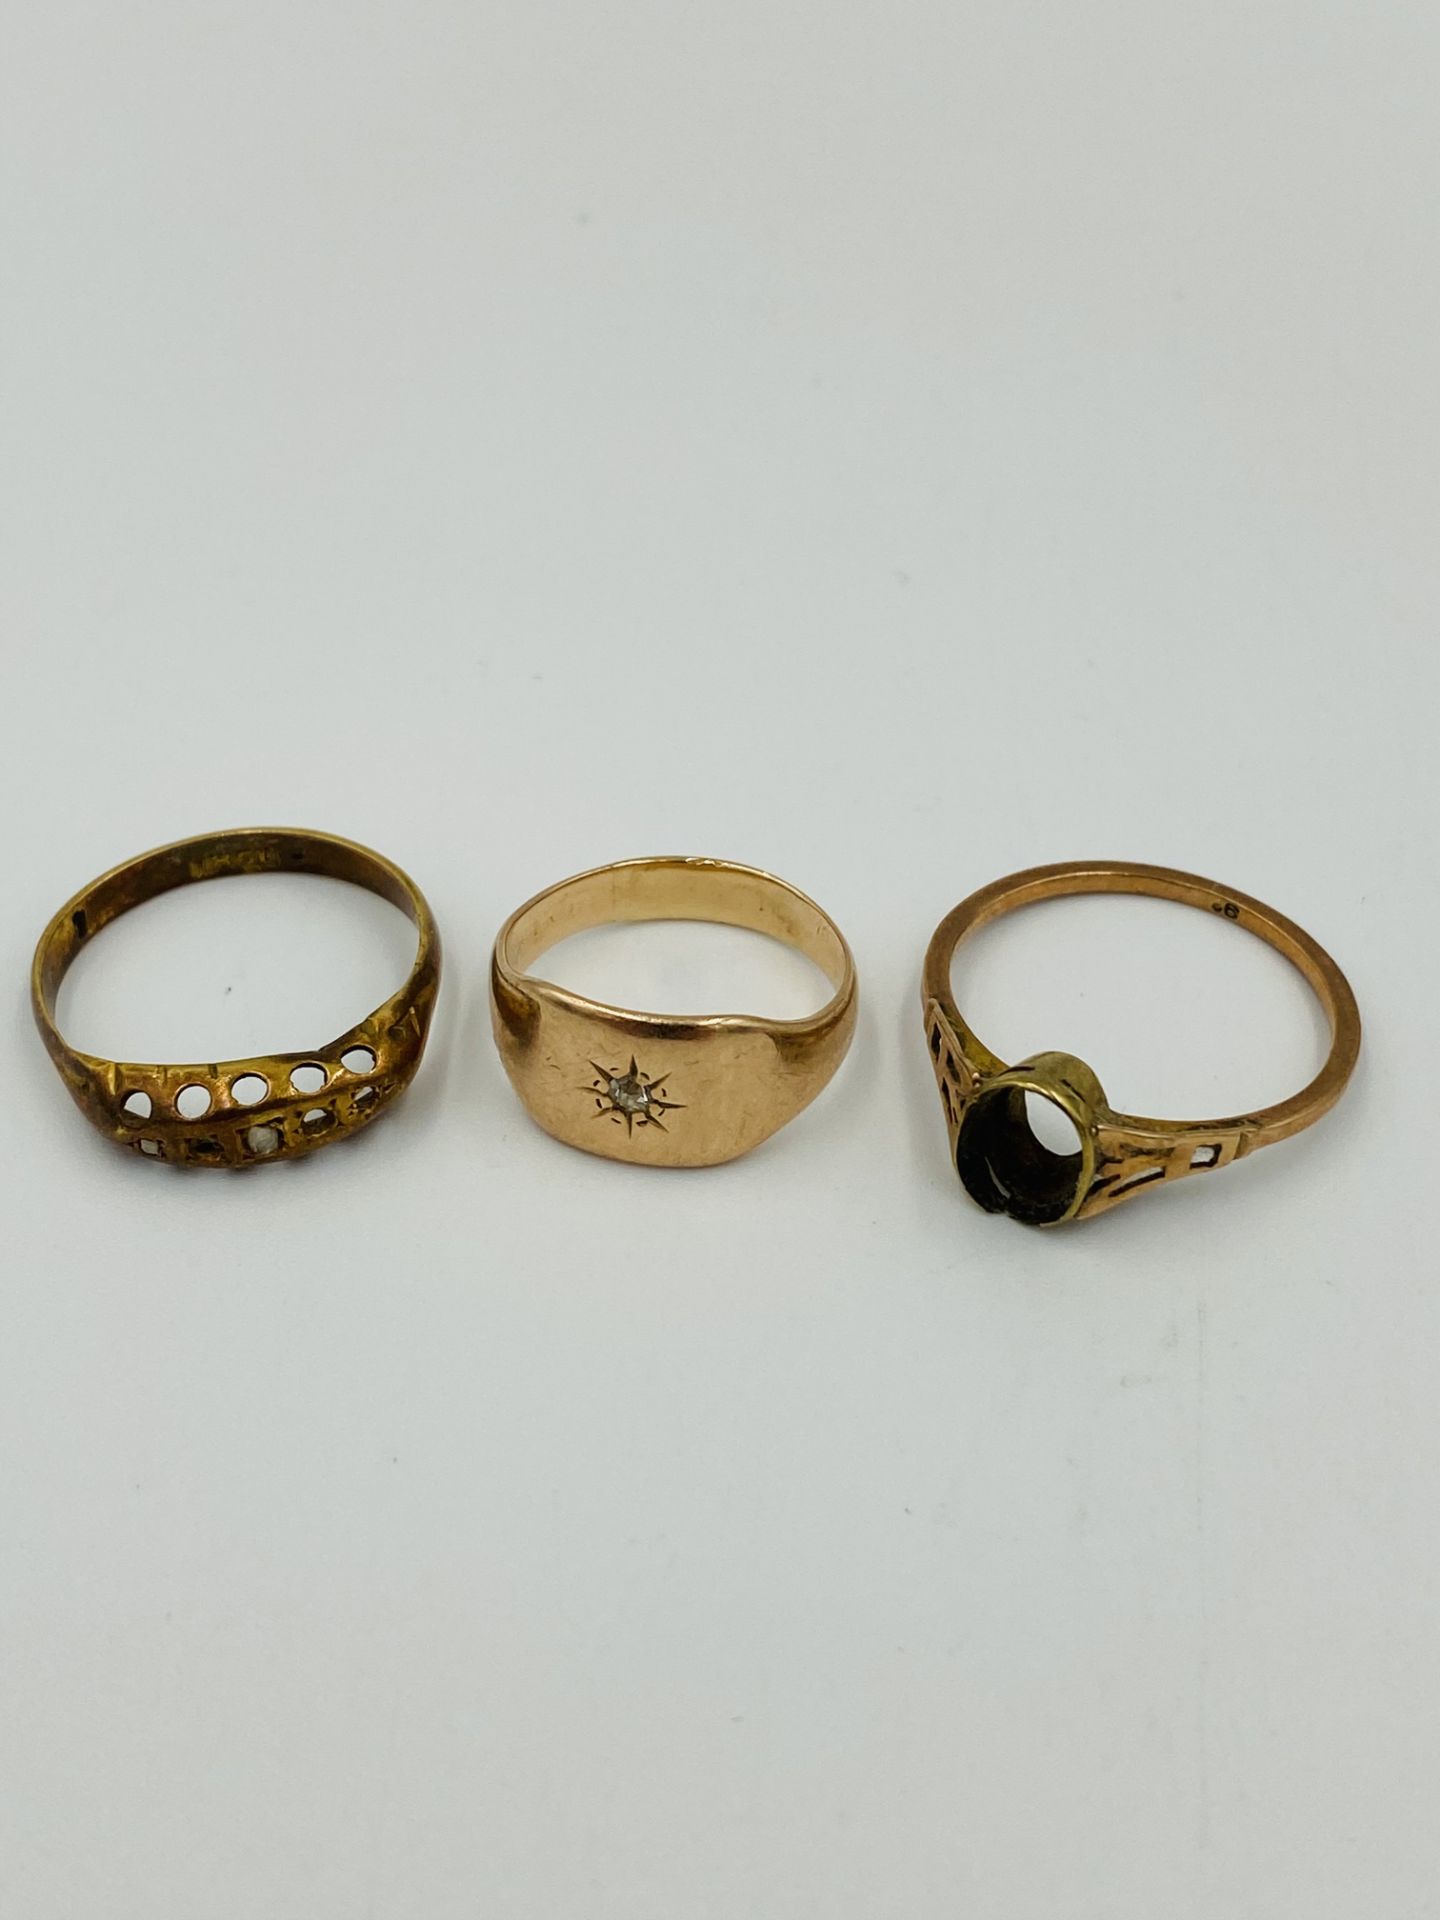 Two gold rings together with a yellow metal ring - Image 3 of 3